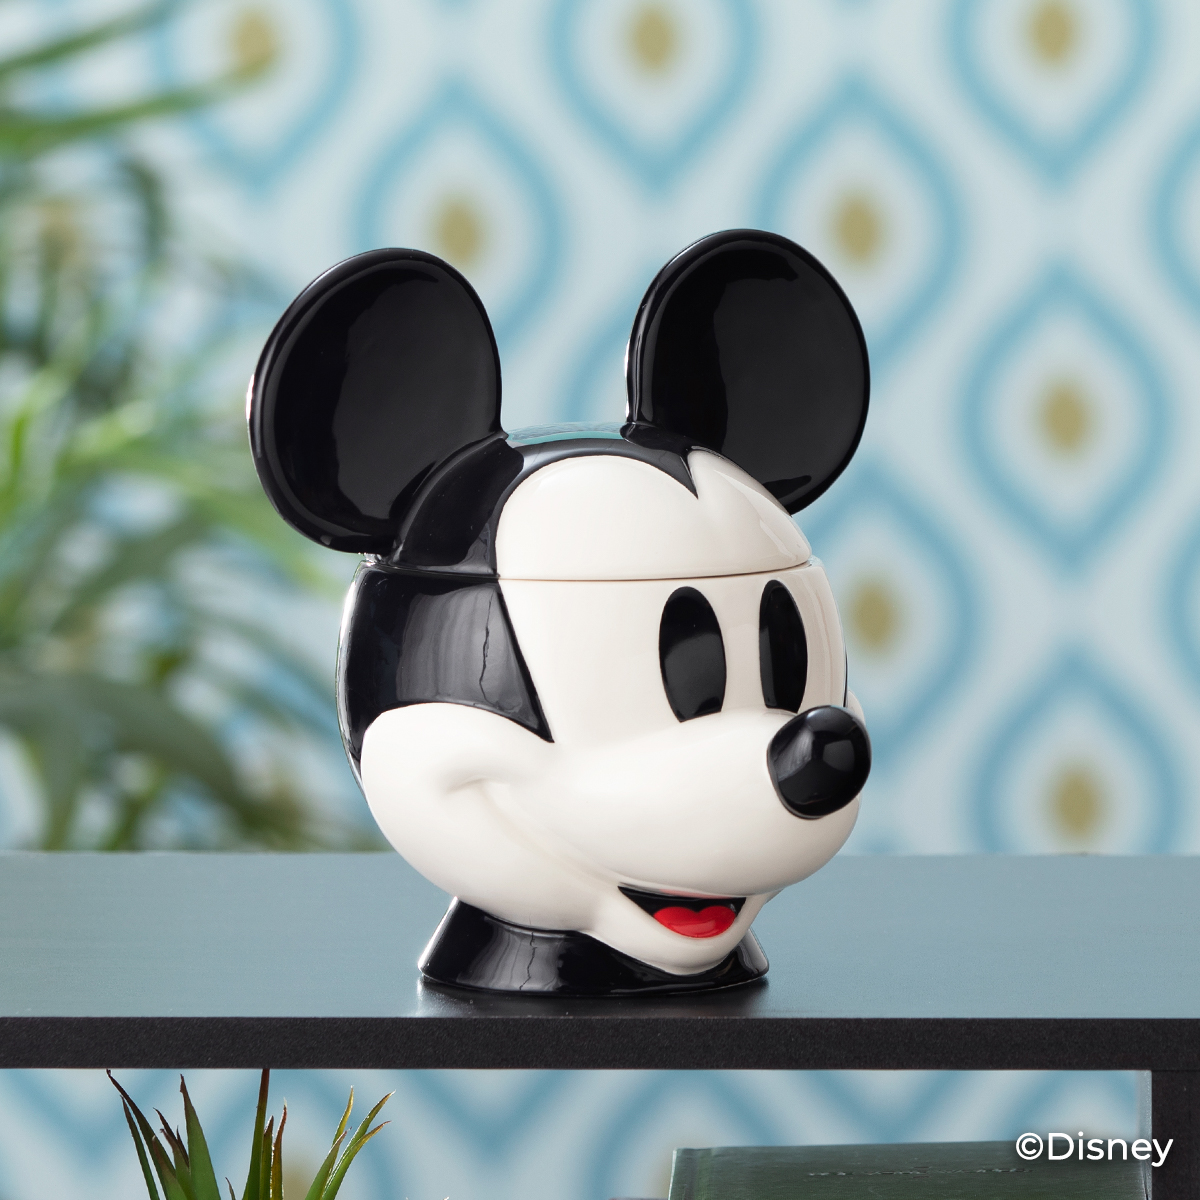 https://scentbars.com/wp-content/uploads/2021/01/MT-MickeyMouse-SS21-R123.jpg